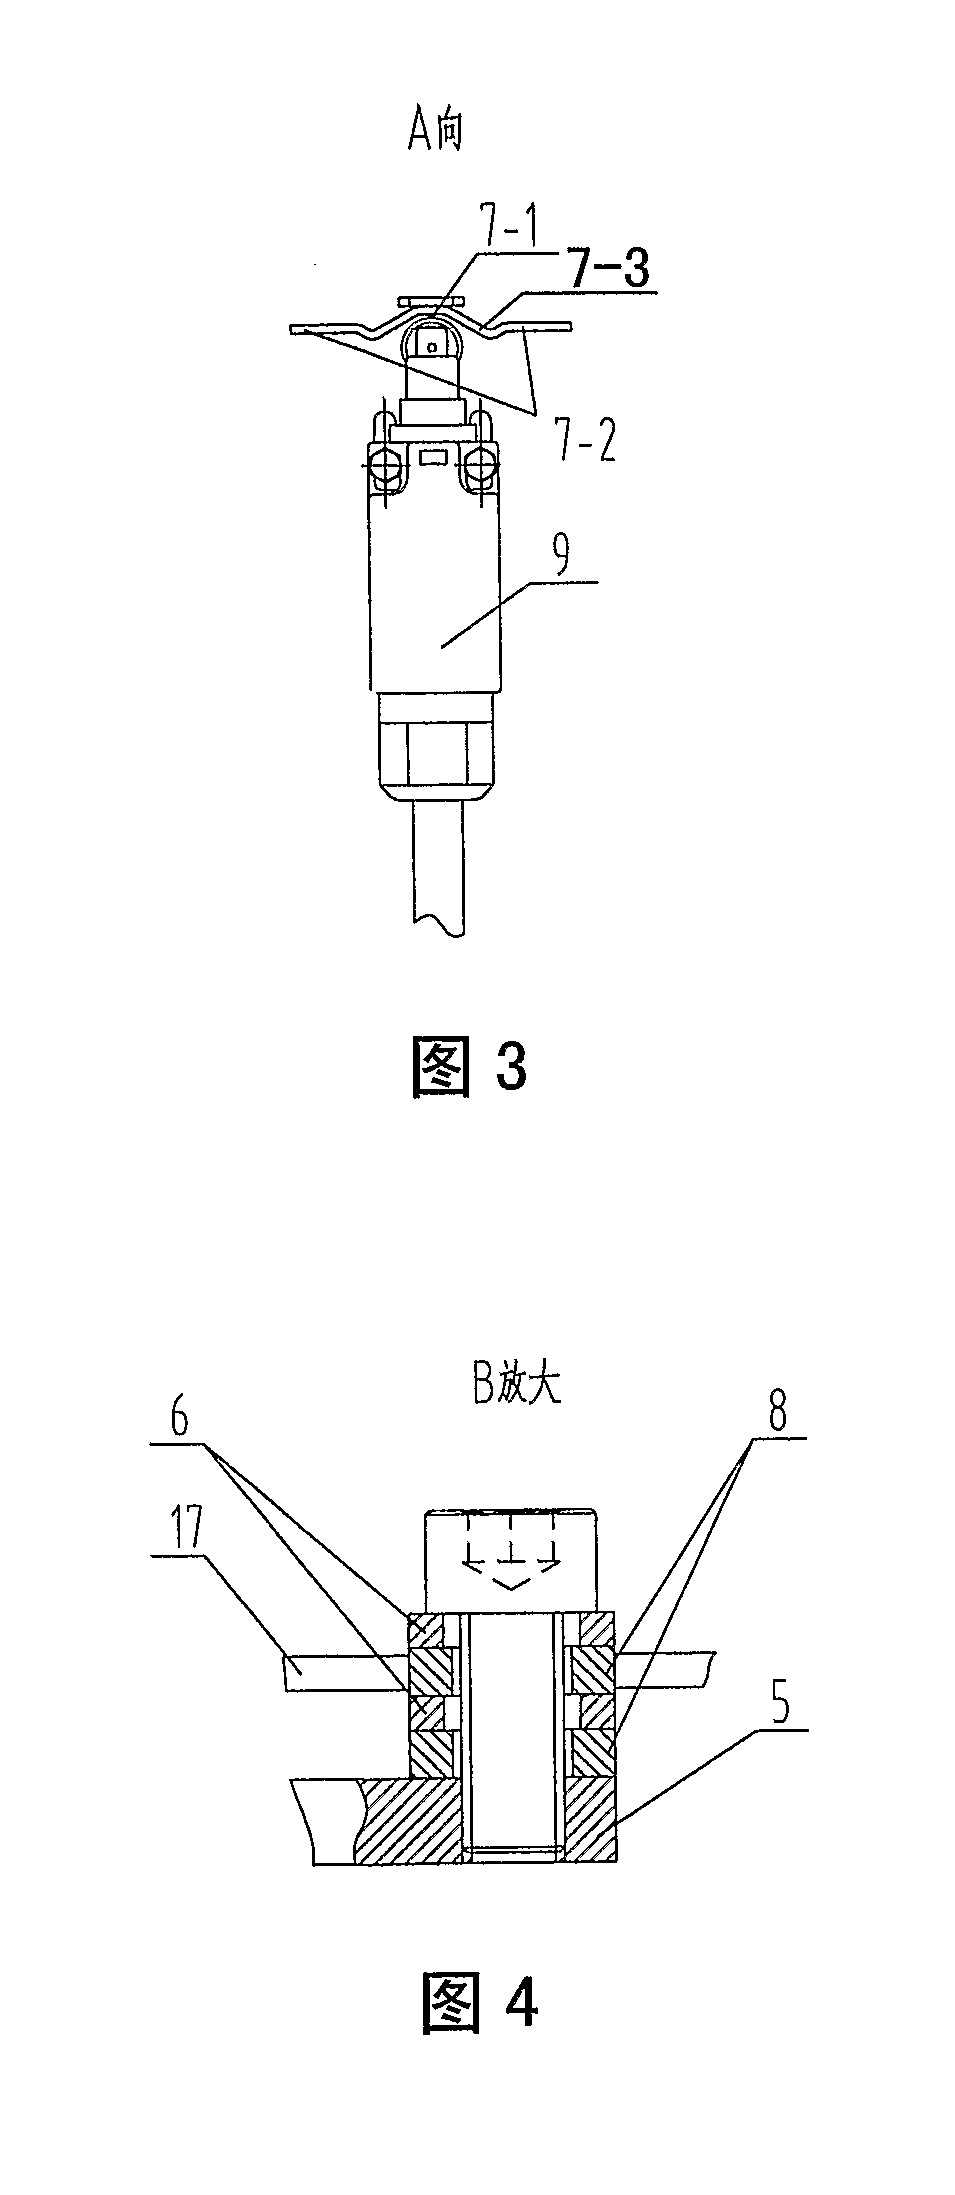 Overspeed protection device for escalator or moving walkway